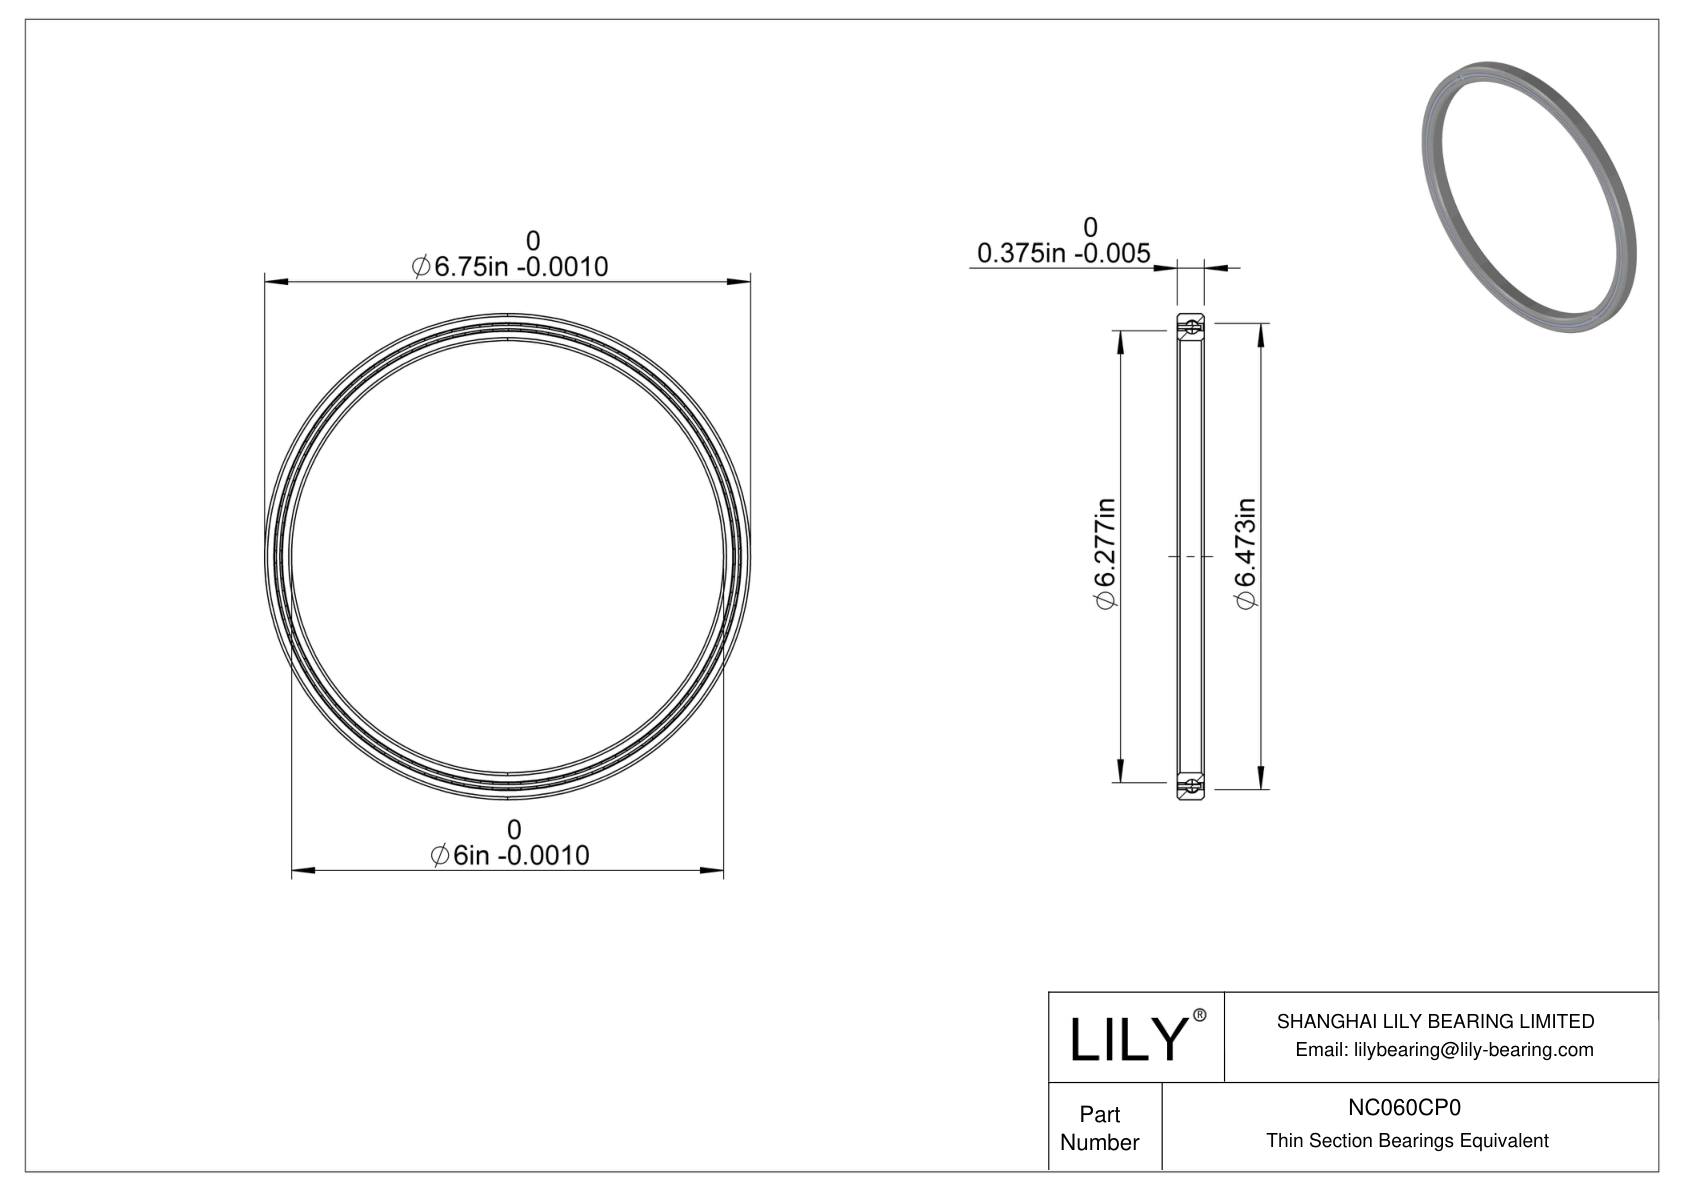 NC060CP0 Constant Section (CS) Bearings cad drawing